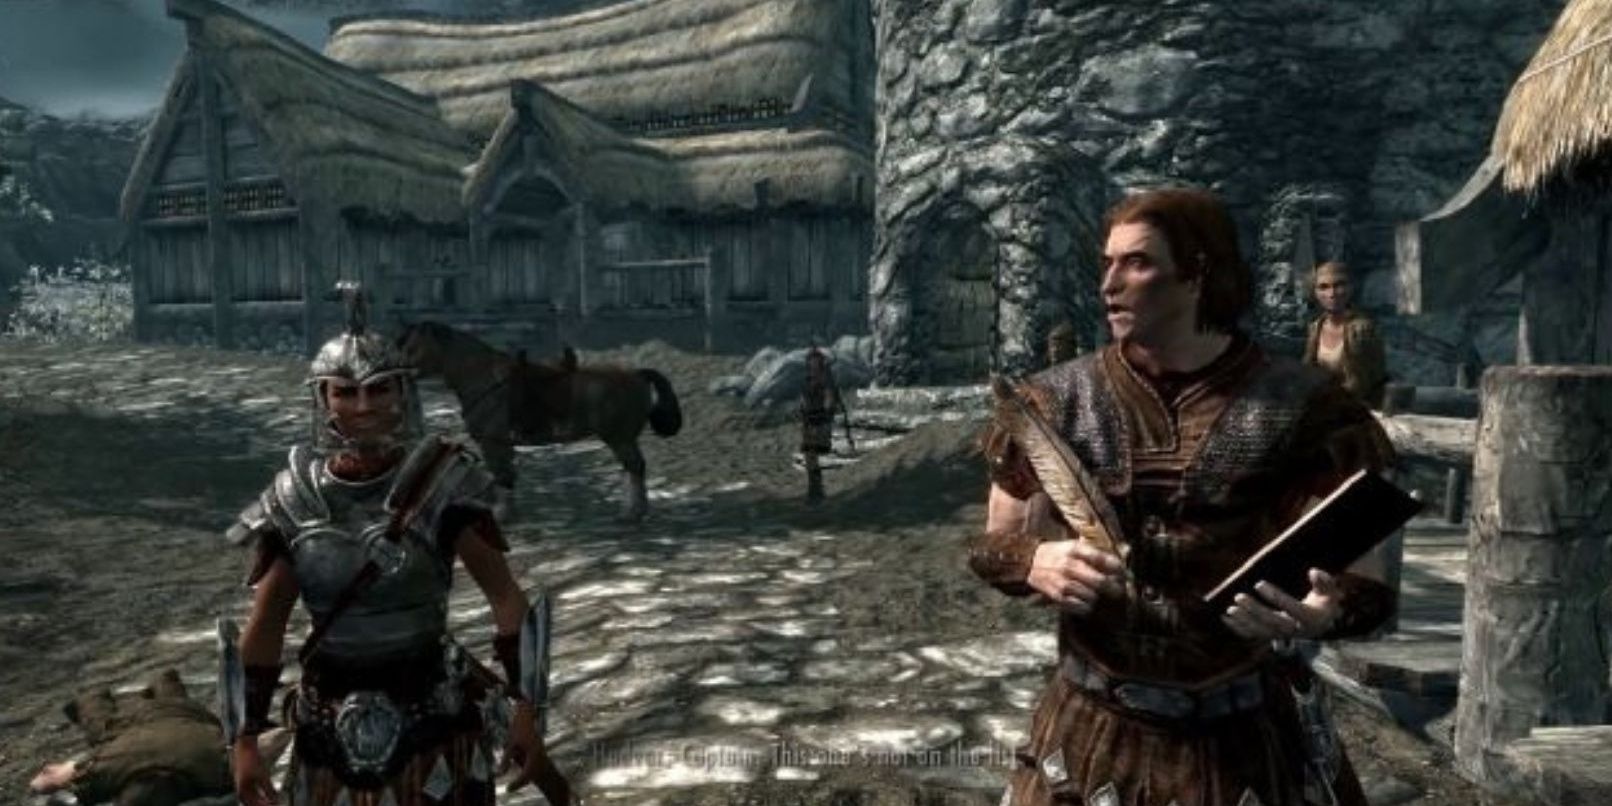 Hadvar and an Imperial soldier in Skyrim